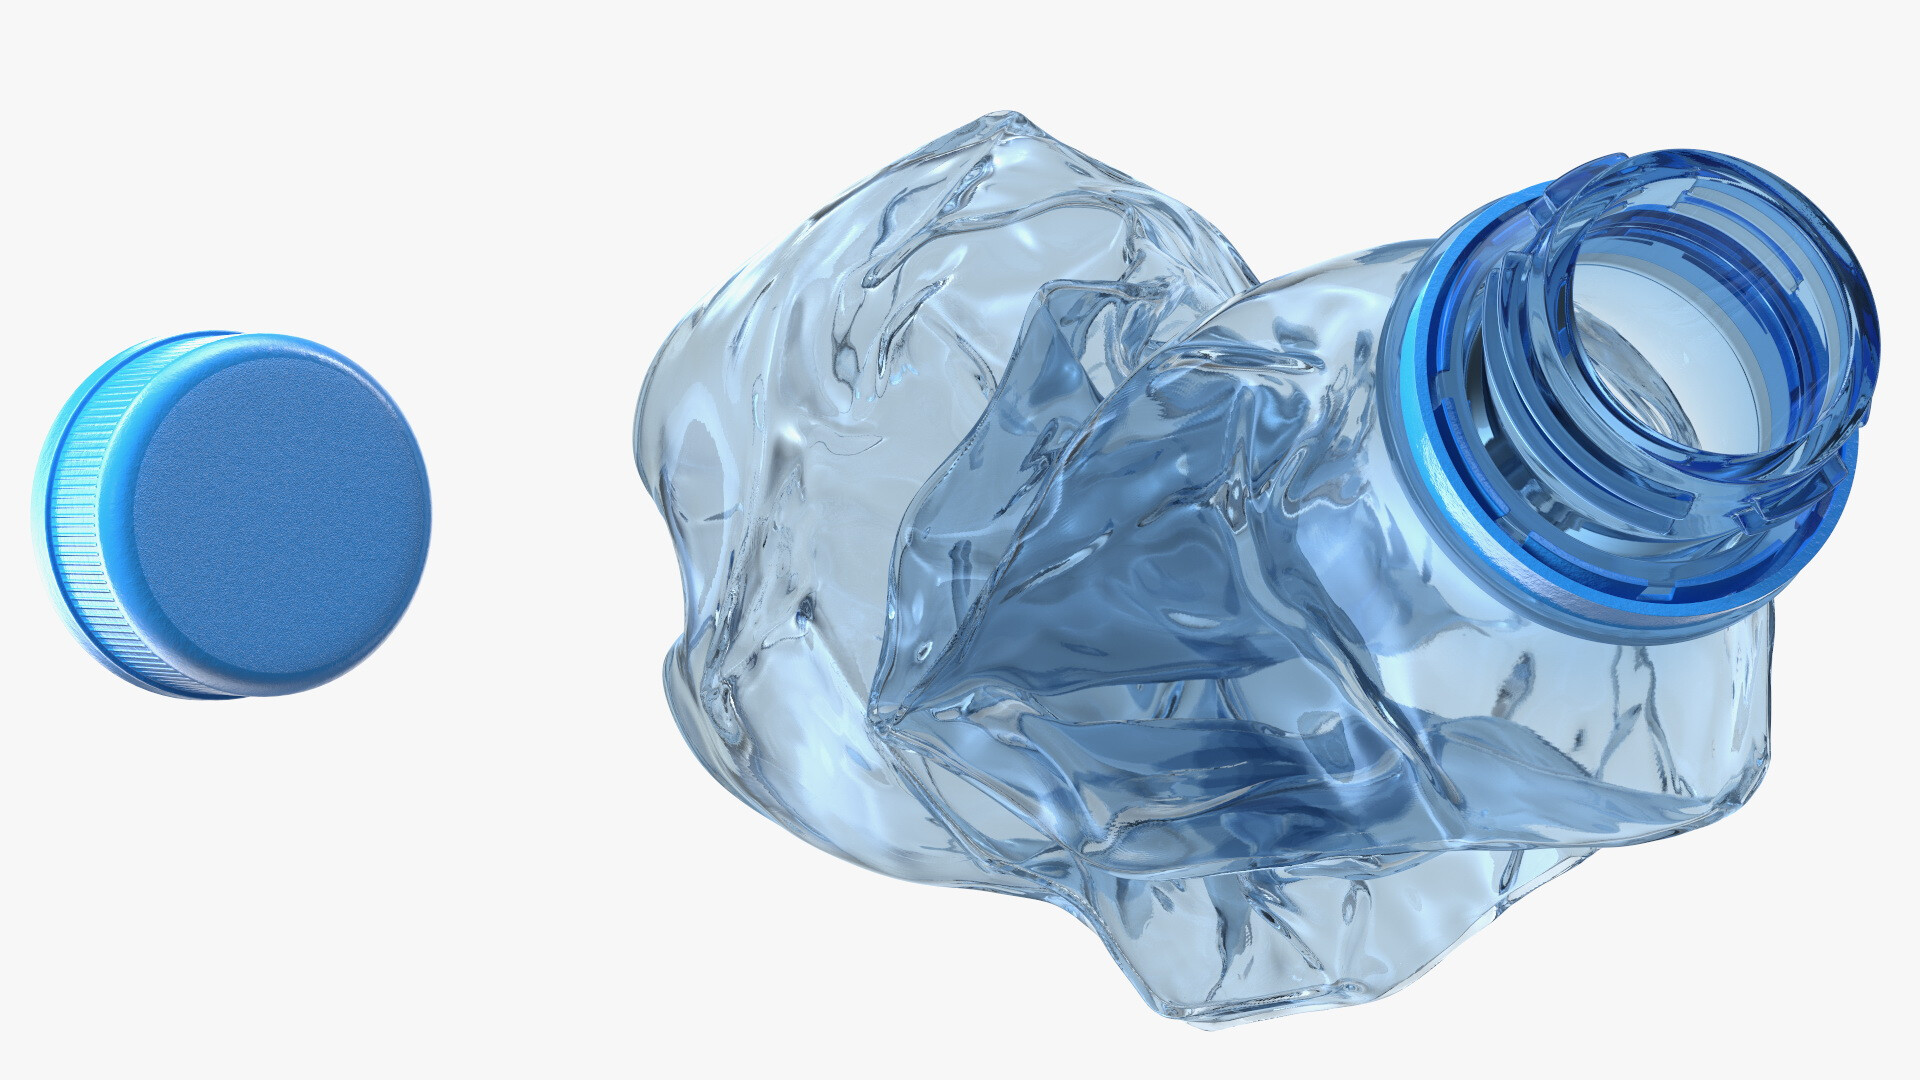 14,818 Small Plastic Water Bottle Images, Stock Photos, 3D objects